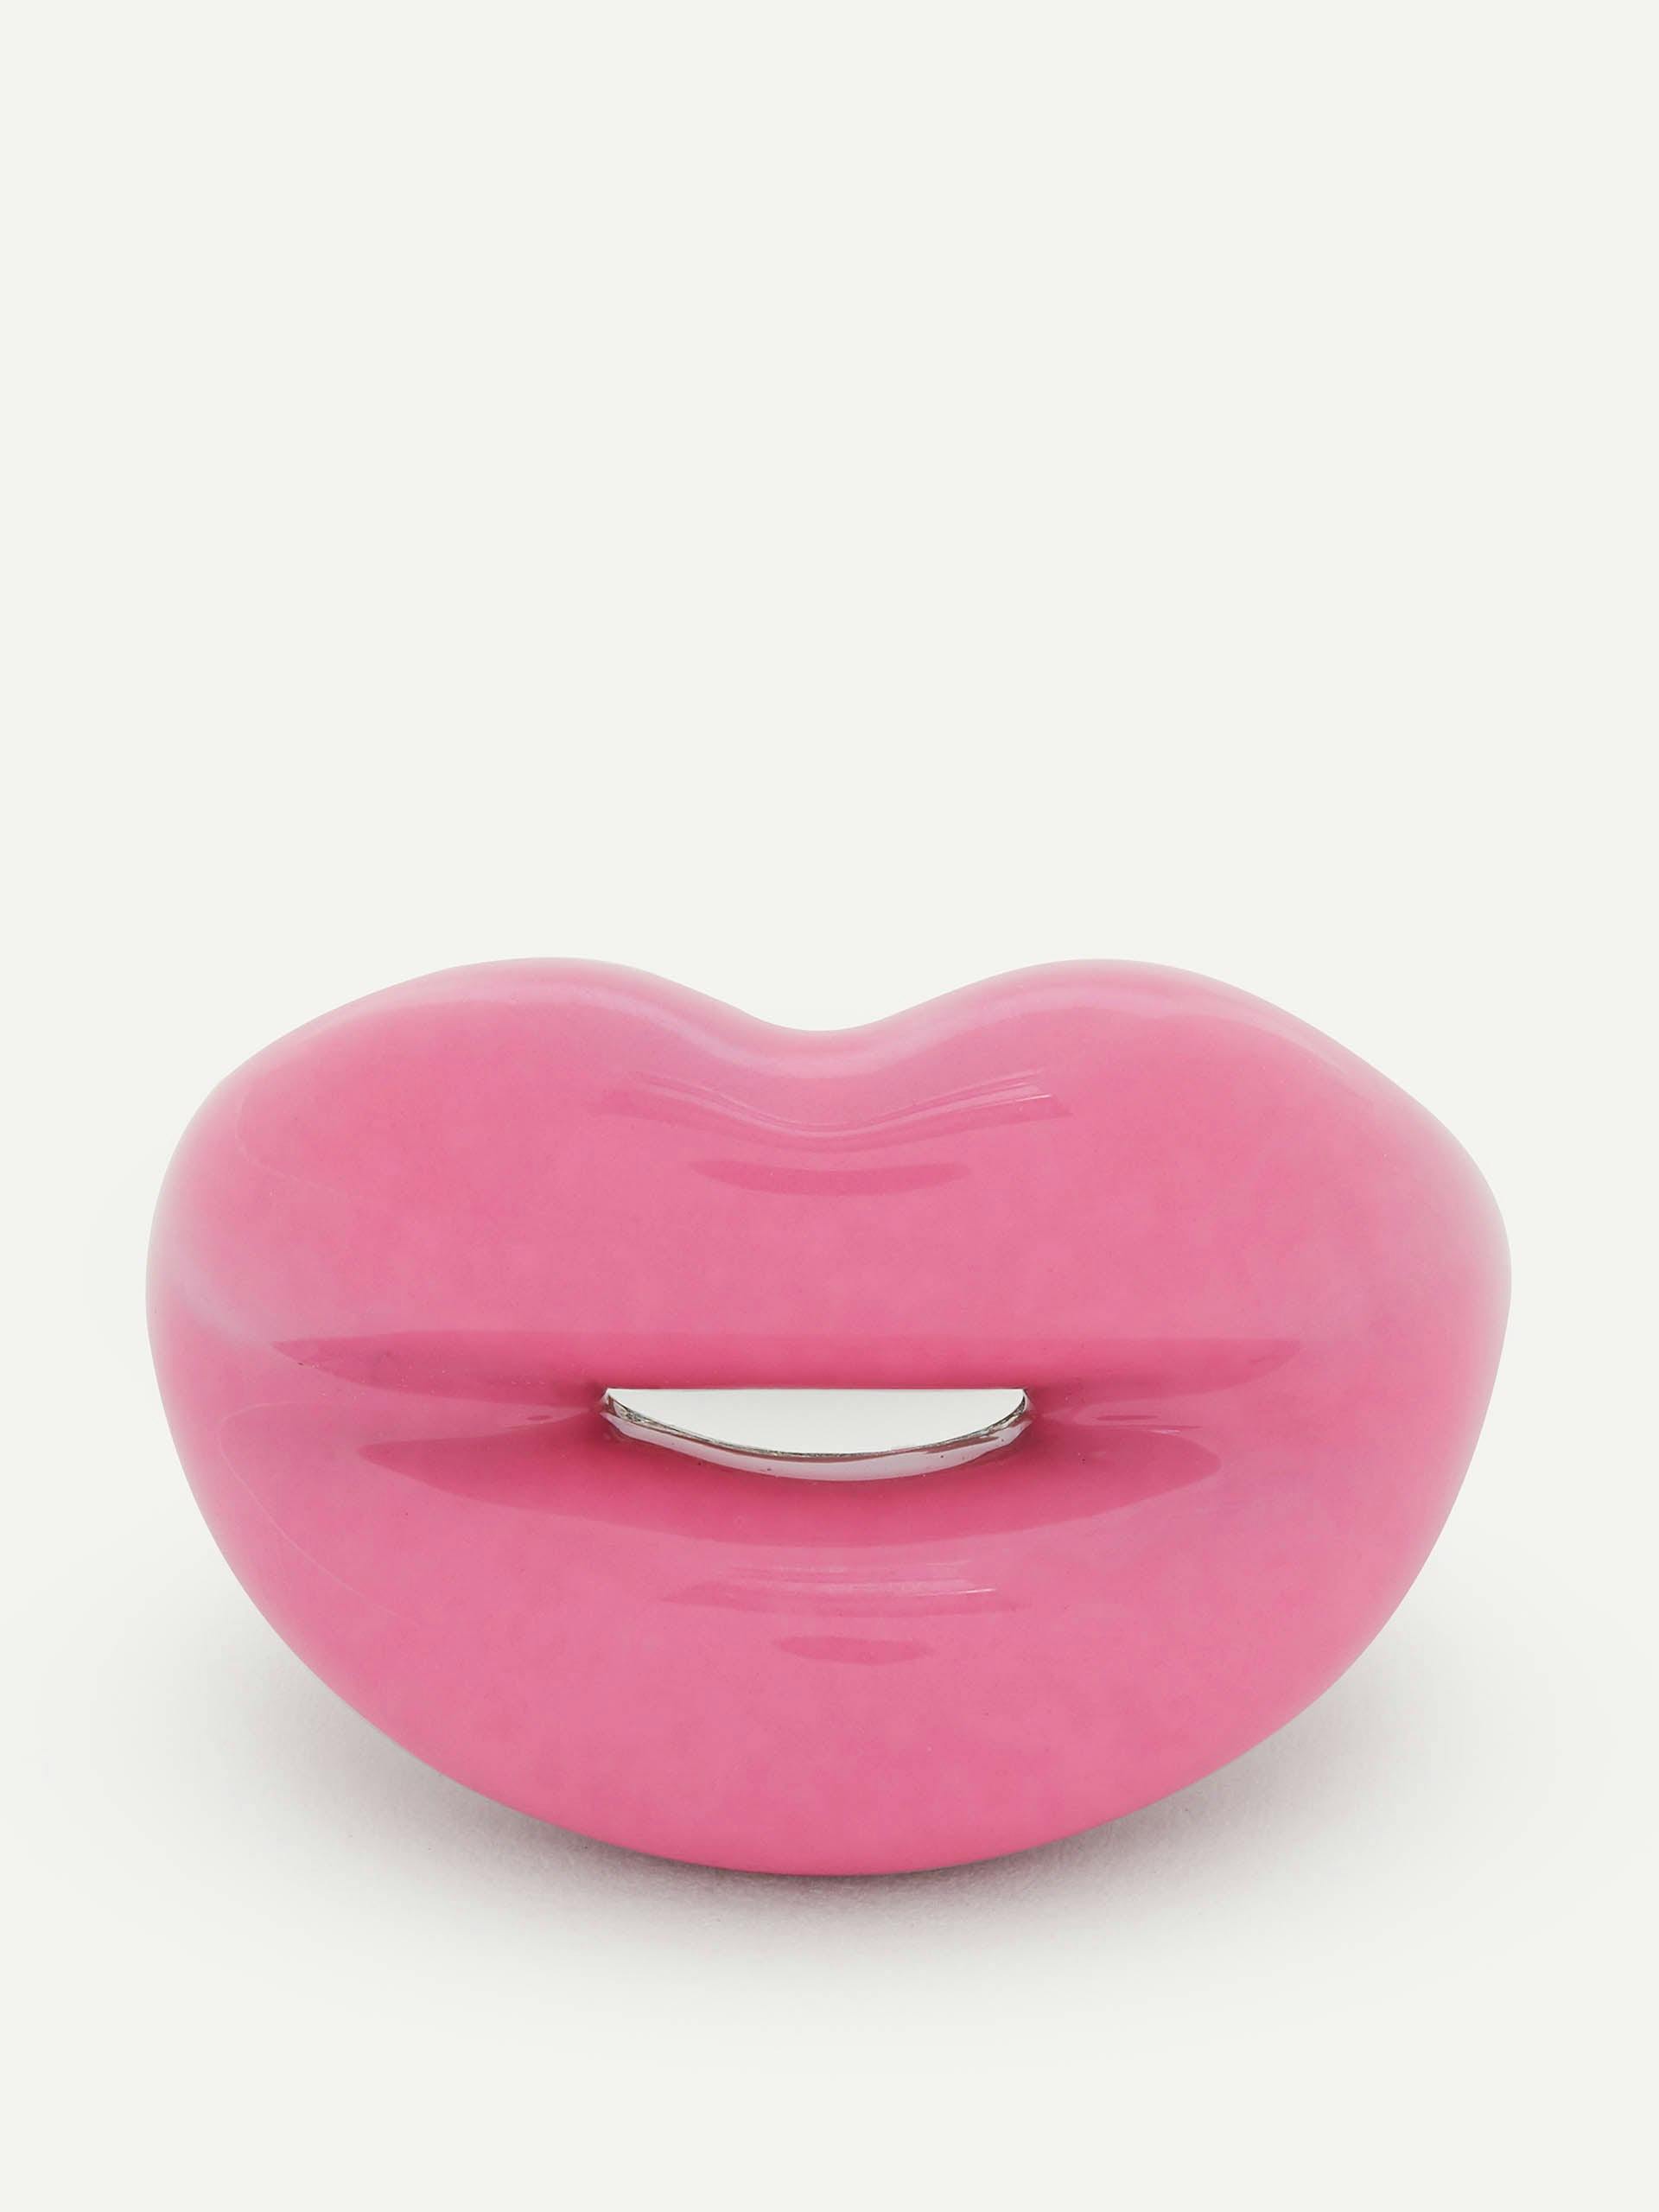 Bubble-gum pink Hotlips ring